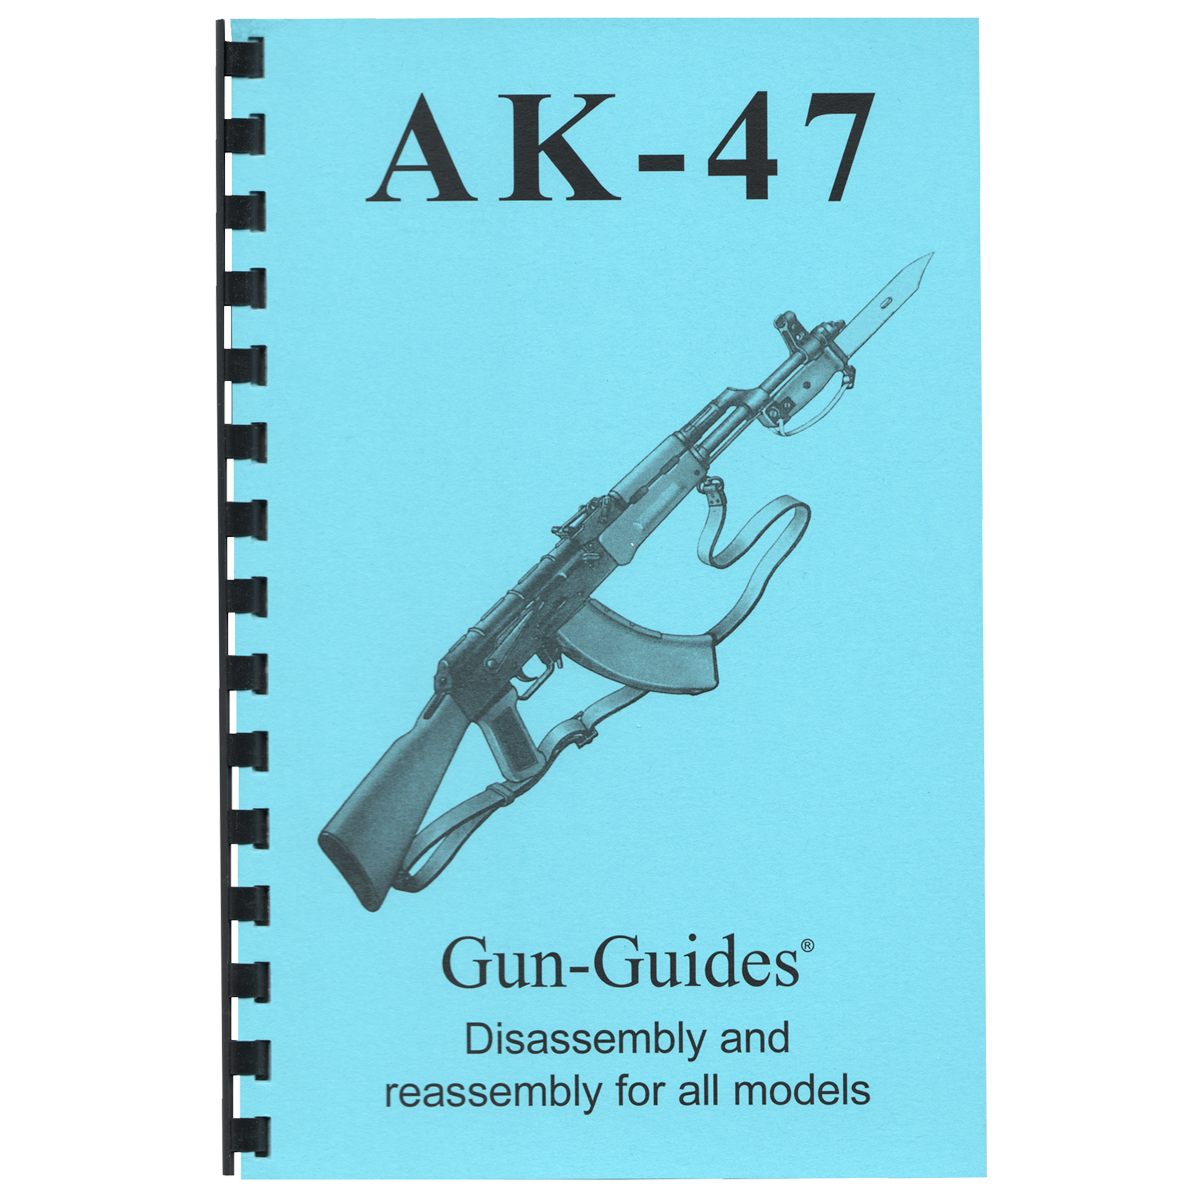 AK-47 Gun-Guides® Disassembly & Reassembly for All Models